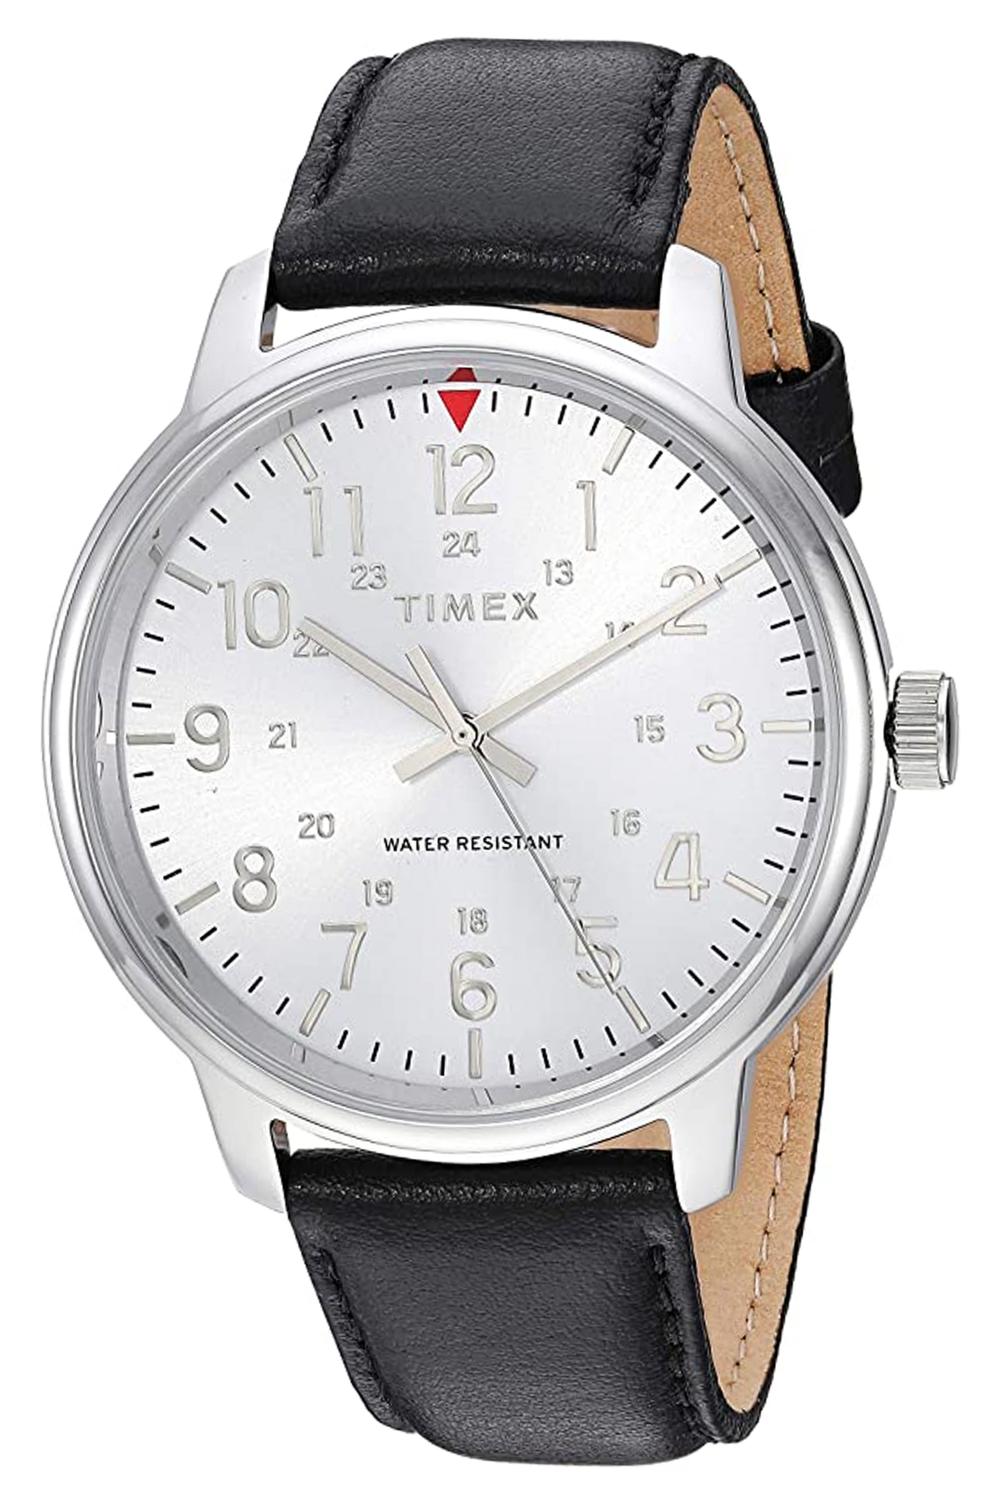 Timex Men's Classic Watch, Silver Case with Black Strap